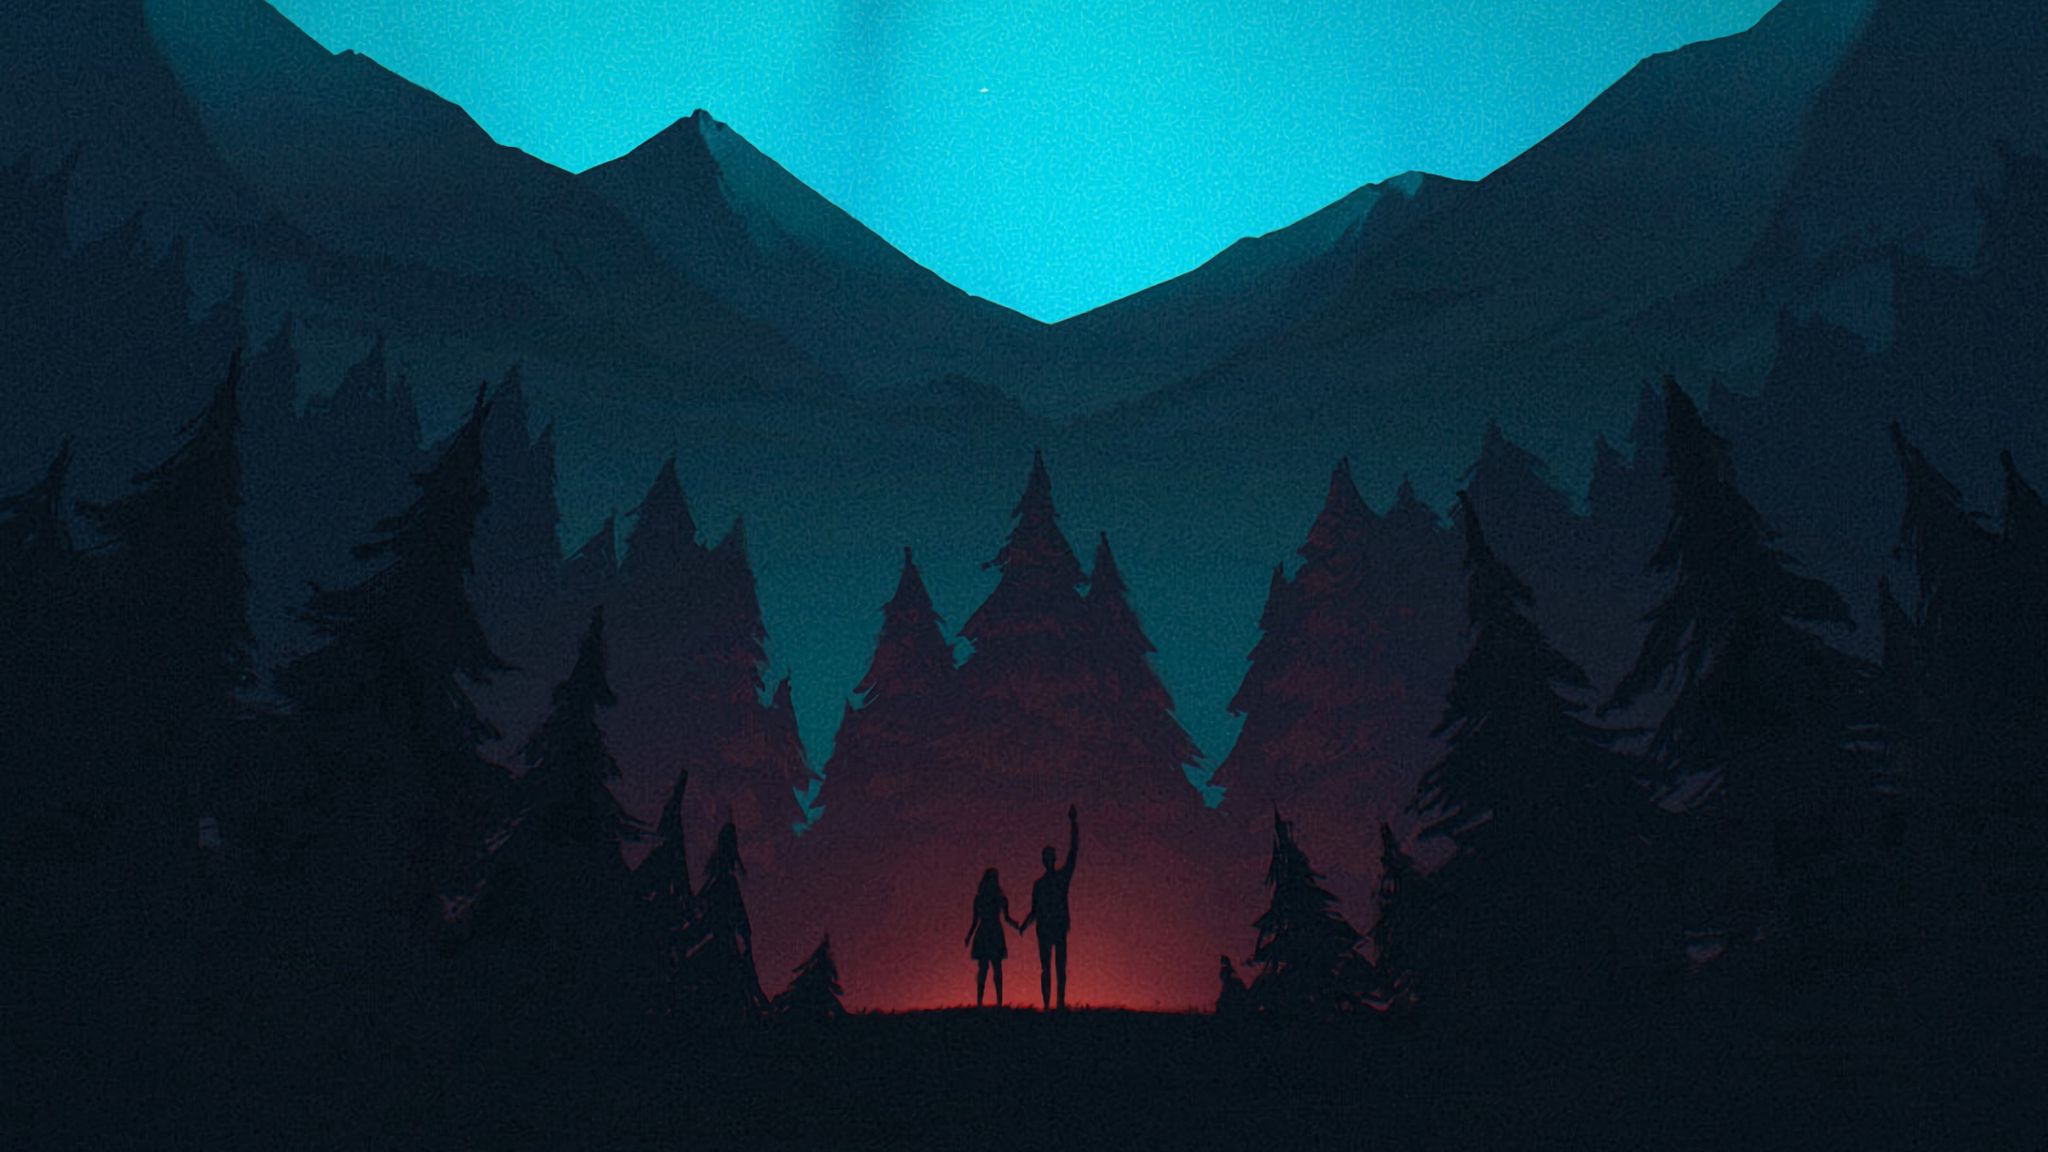 2048x1152 Wallpaper night, forest, mountains, starry sky, silhouettes, art